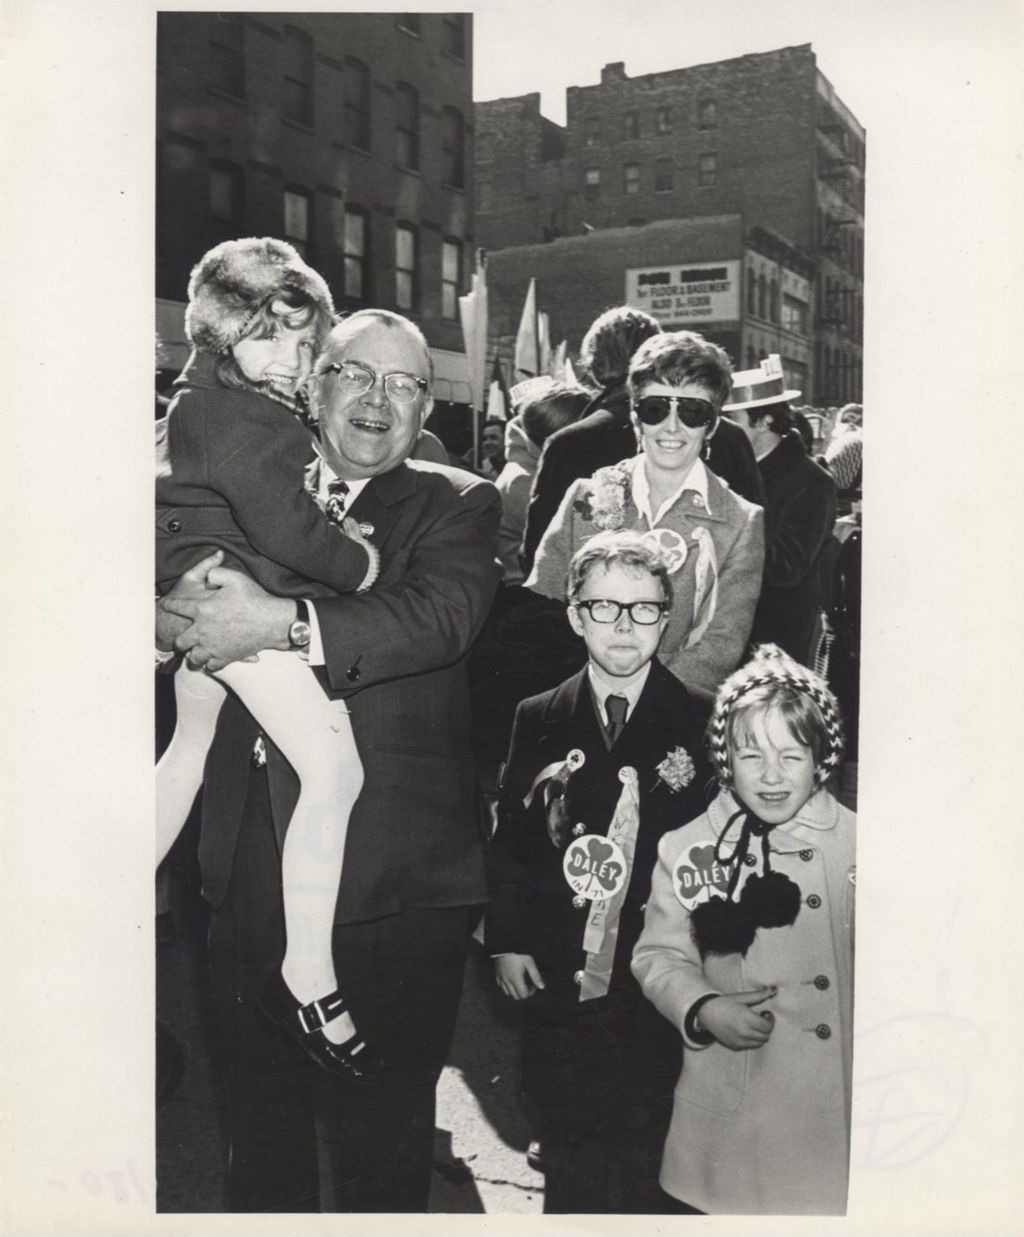 Miniature of Family wearing Daley '71 campaign buttons at a "We Care" event